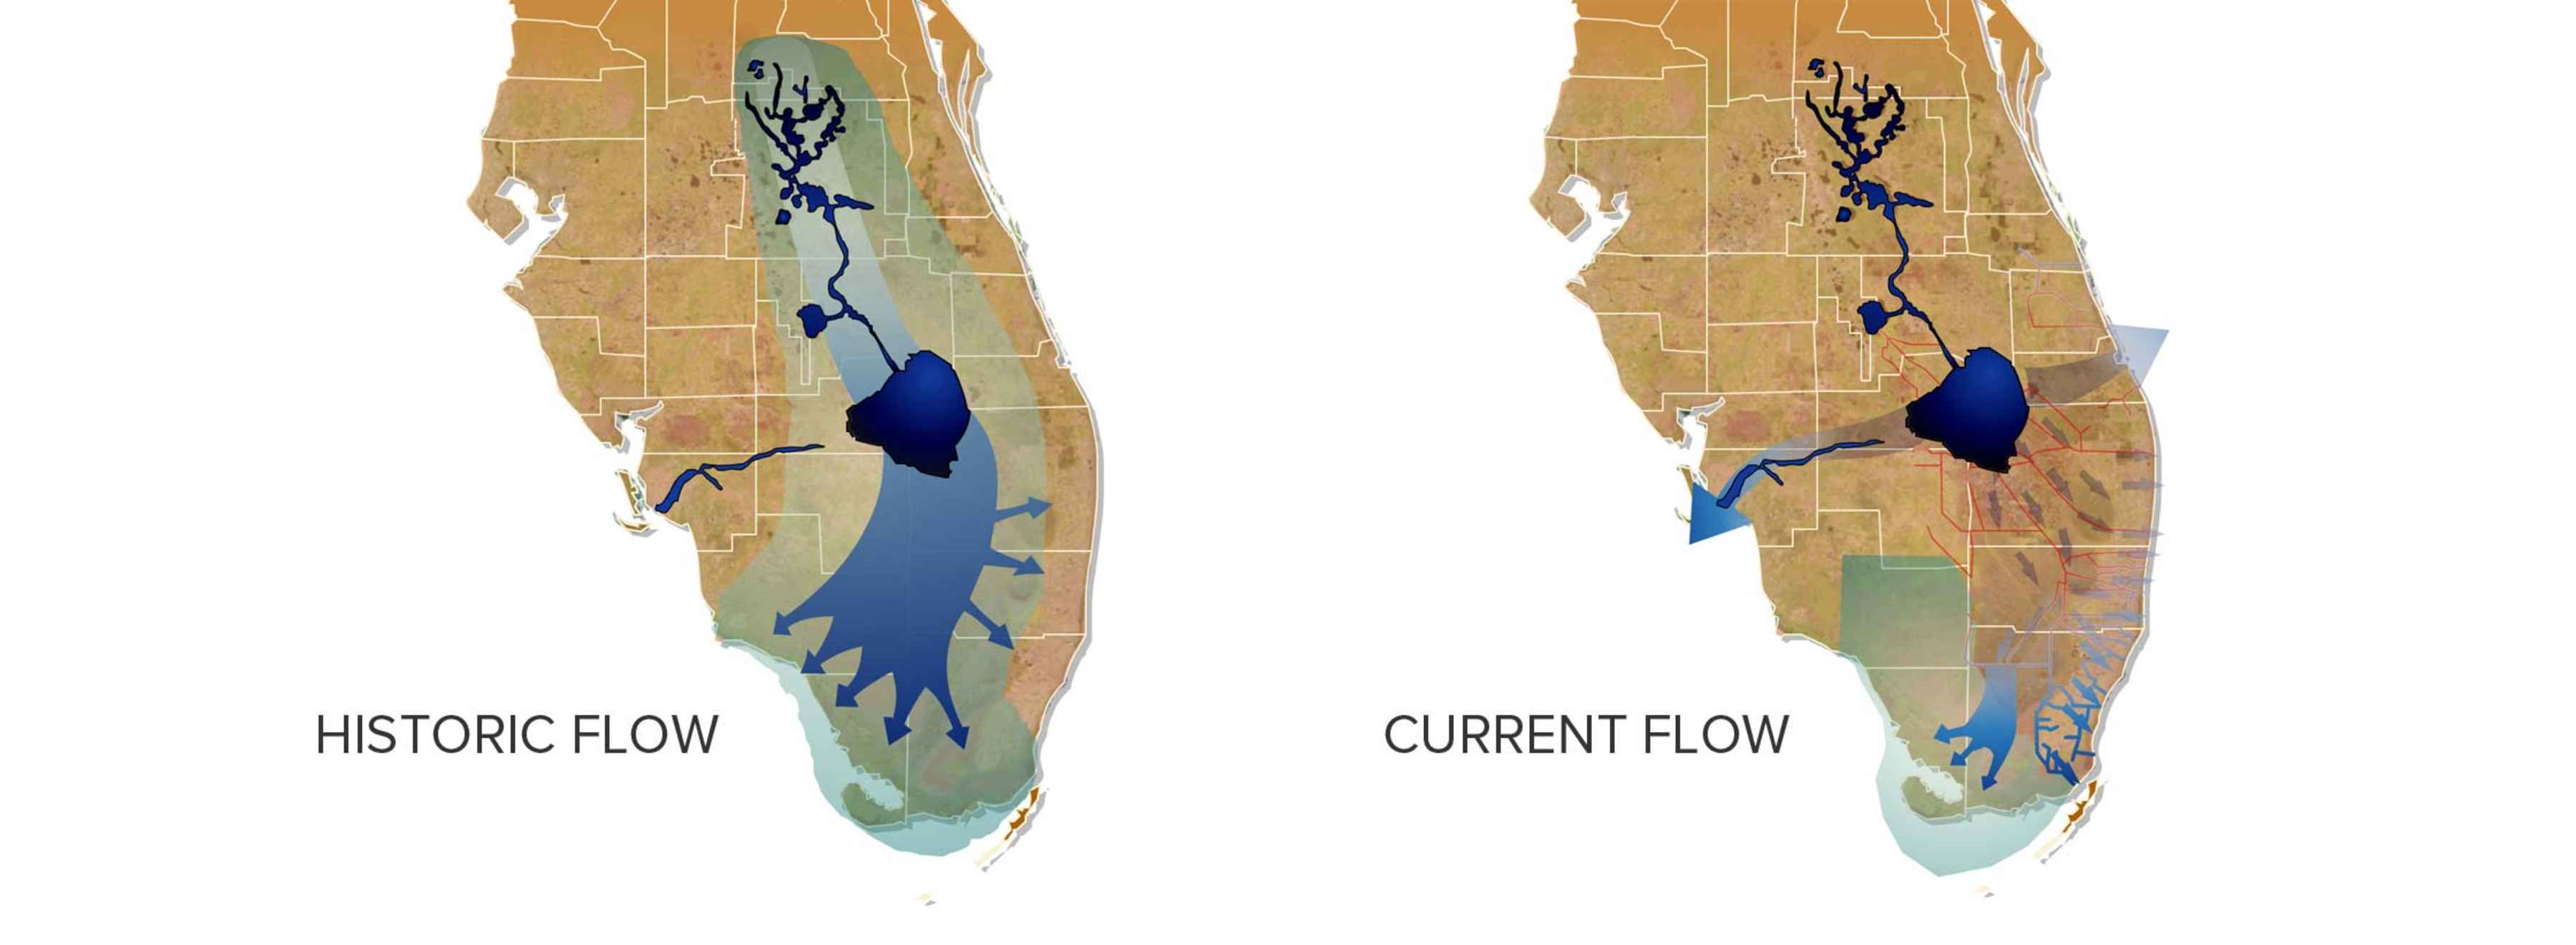 everglades water flow - historic and current